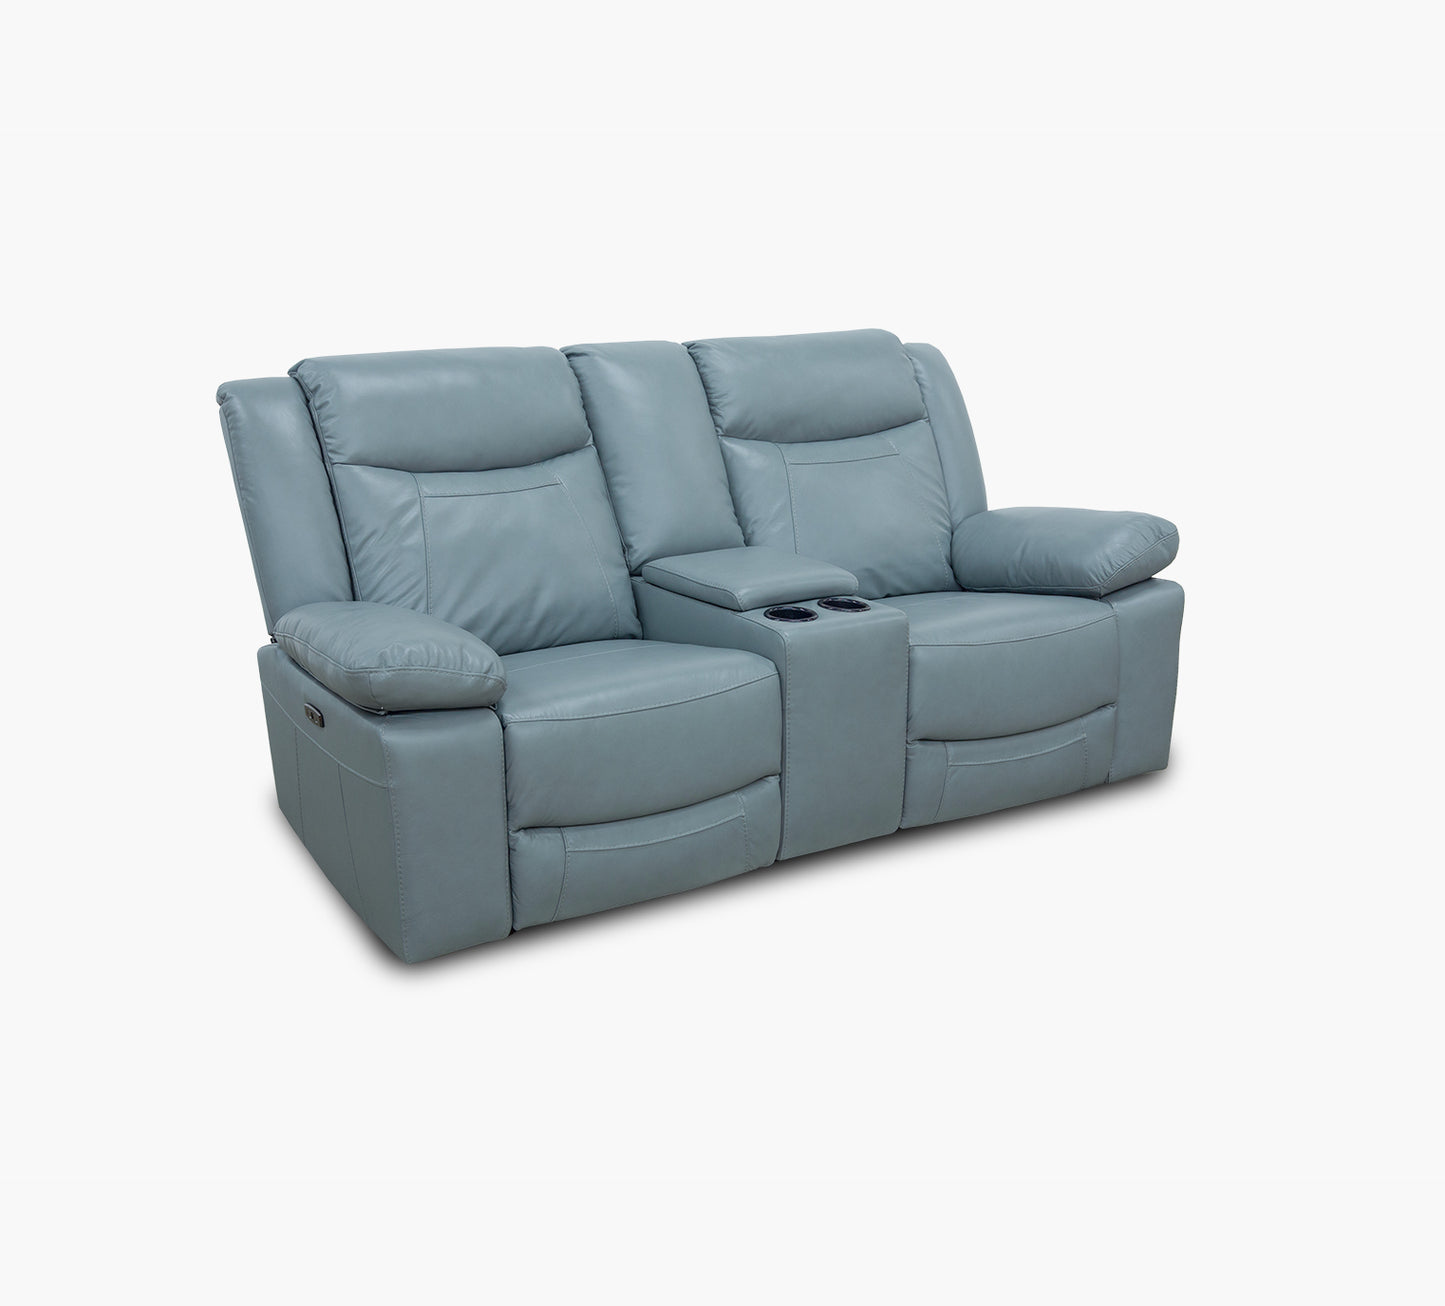 Dallas Teal Leather Reclining Console Loveseat